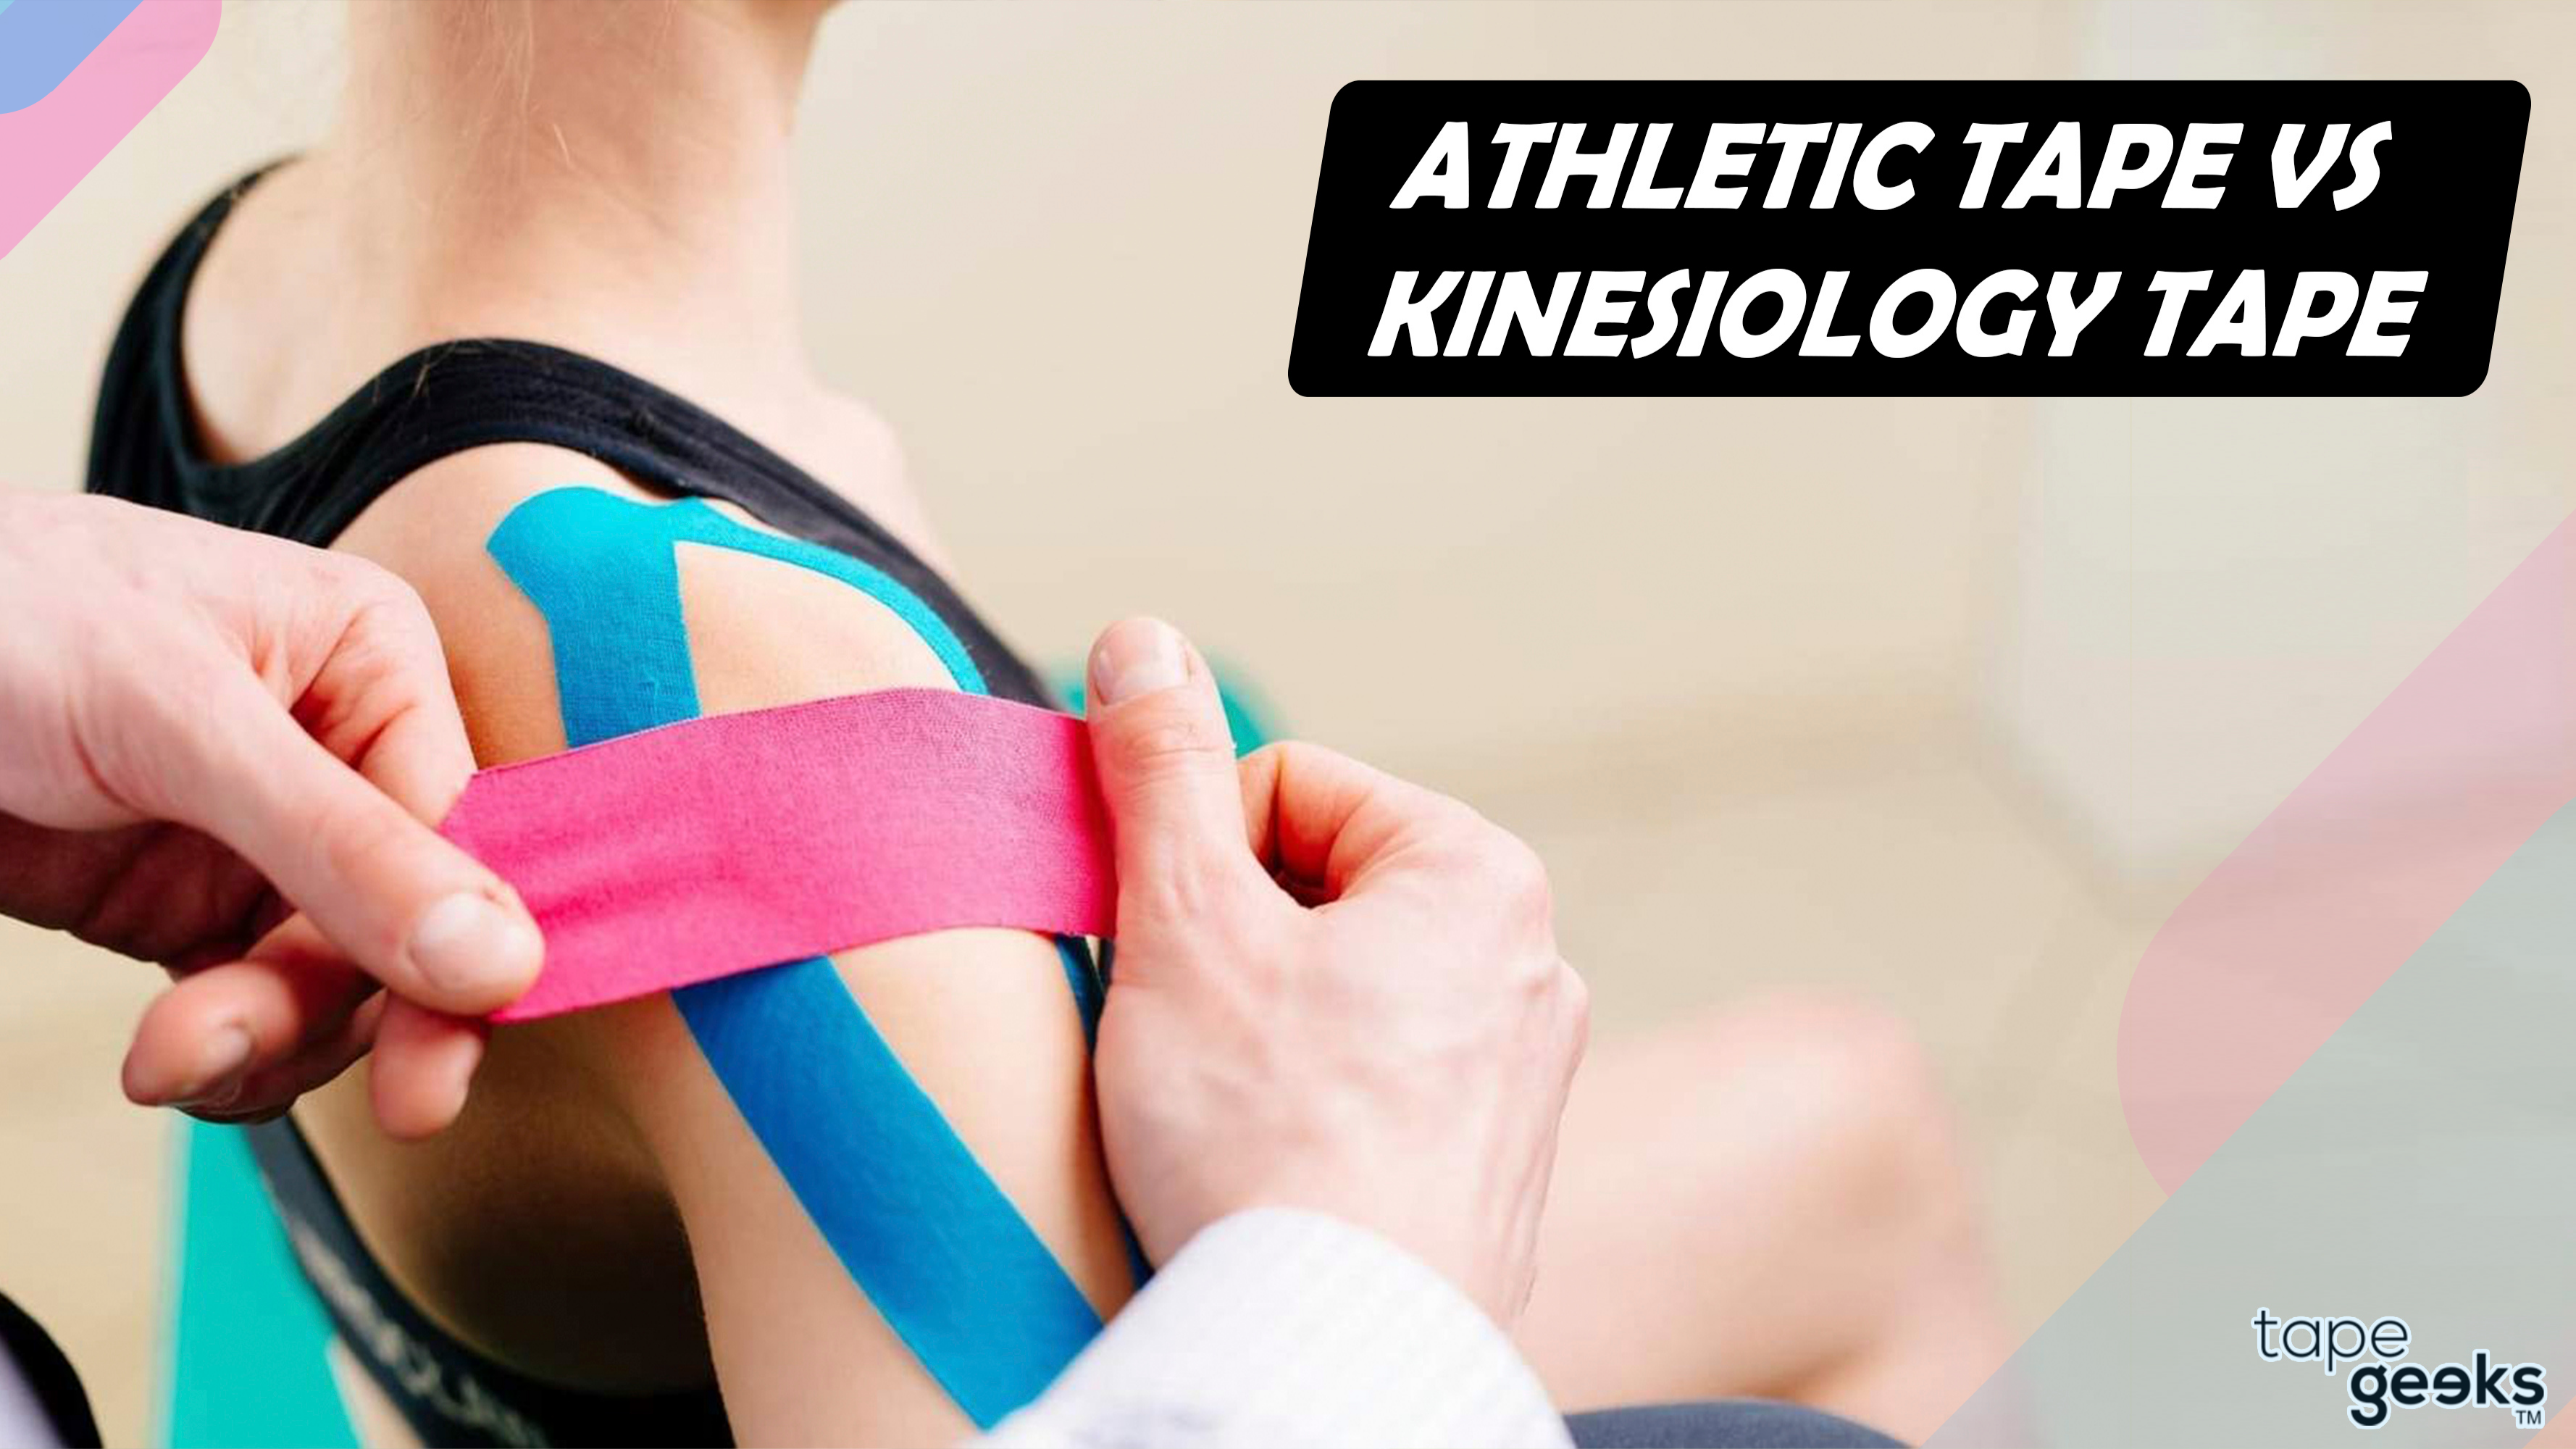 Starktape Kinesiology Tape Physio Medical Sports Tapes for